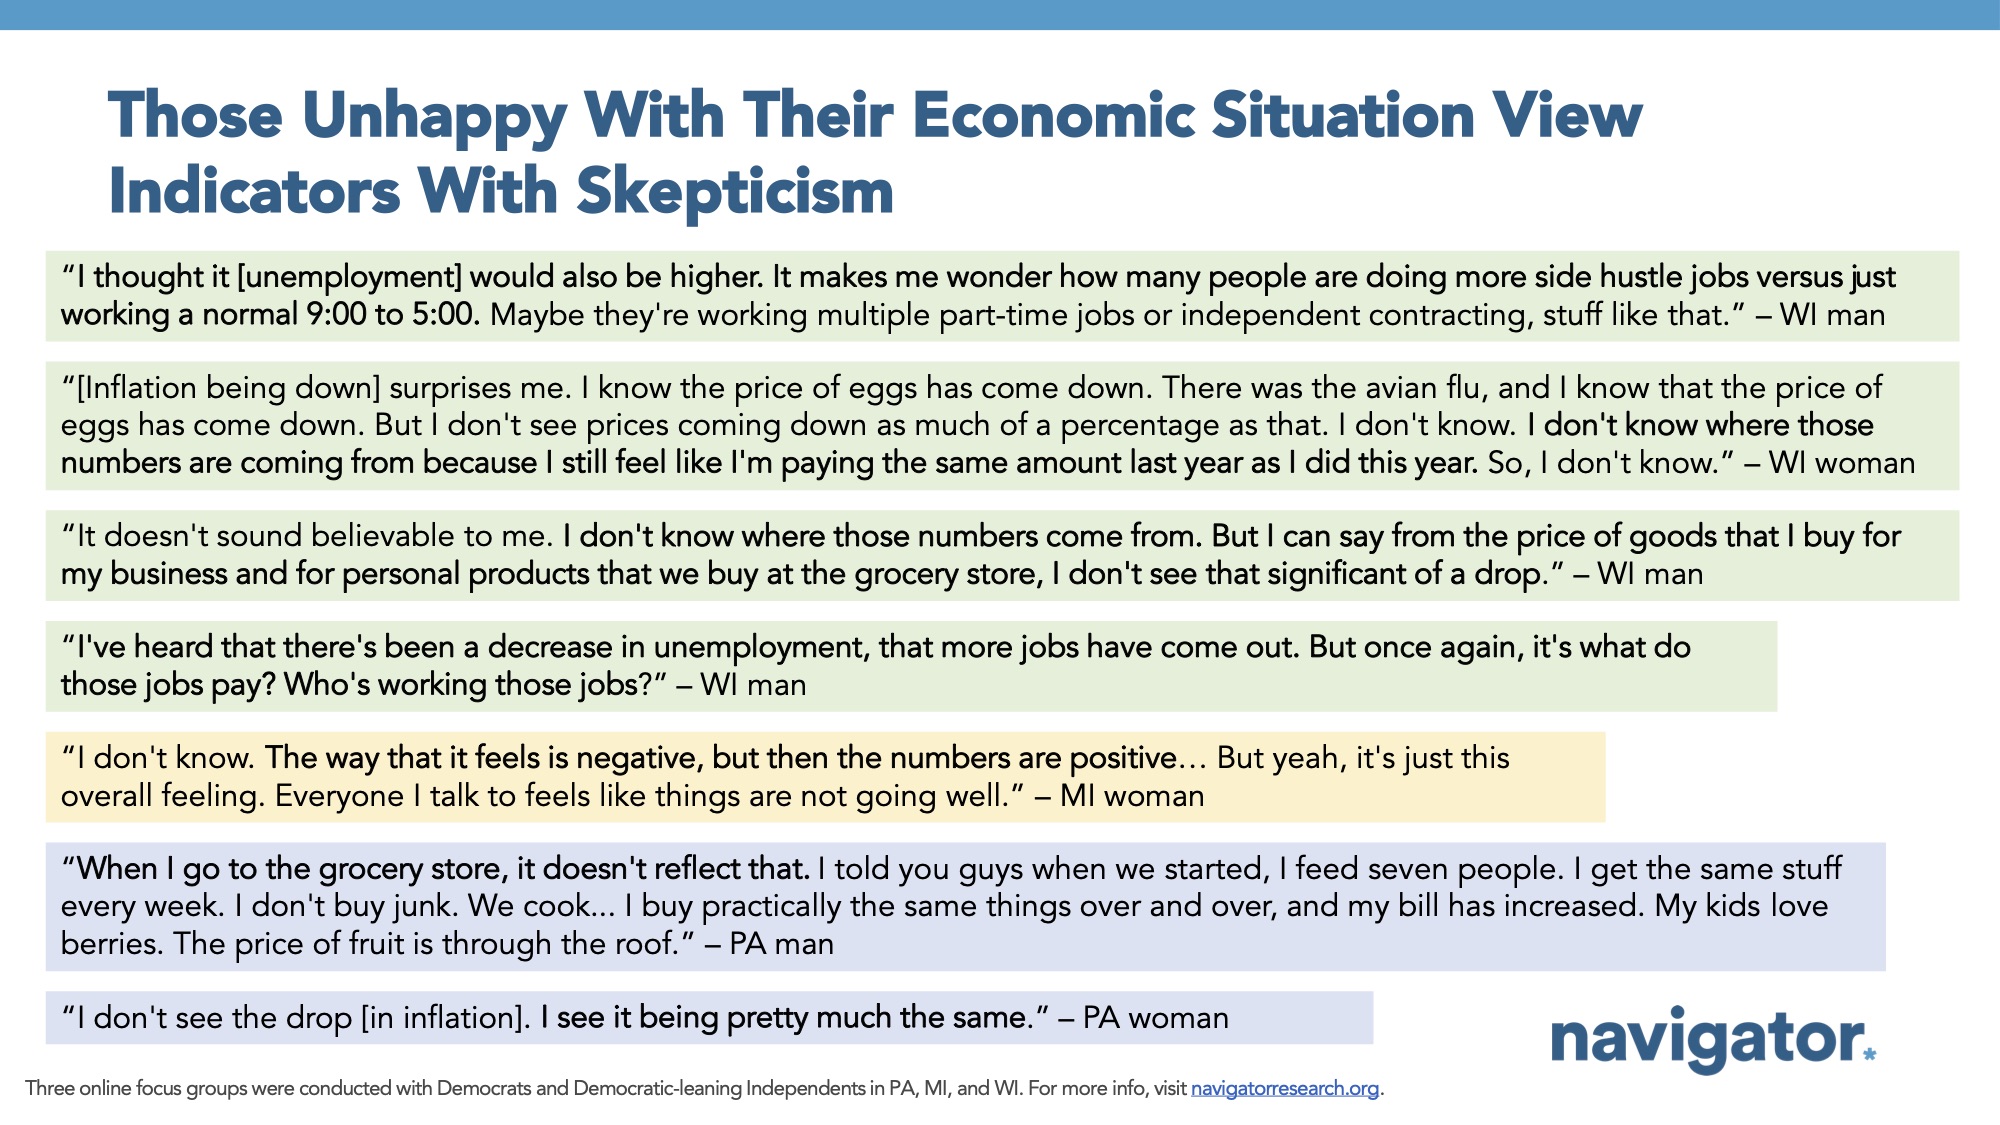 Focus group report slide titled: Those Unhappy With Their Economic Situation View Indicators With Skepticism